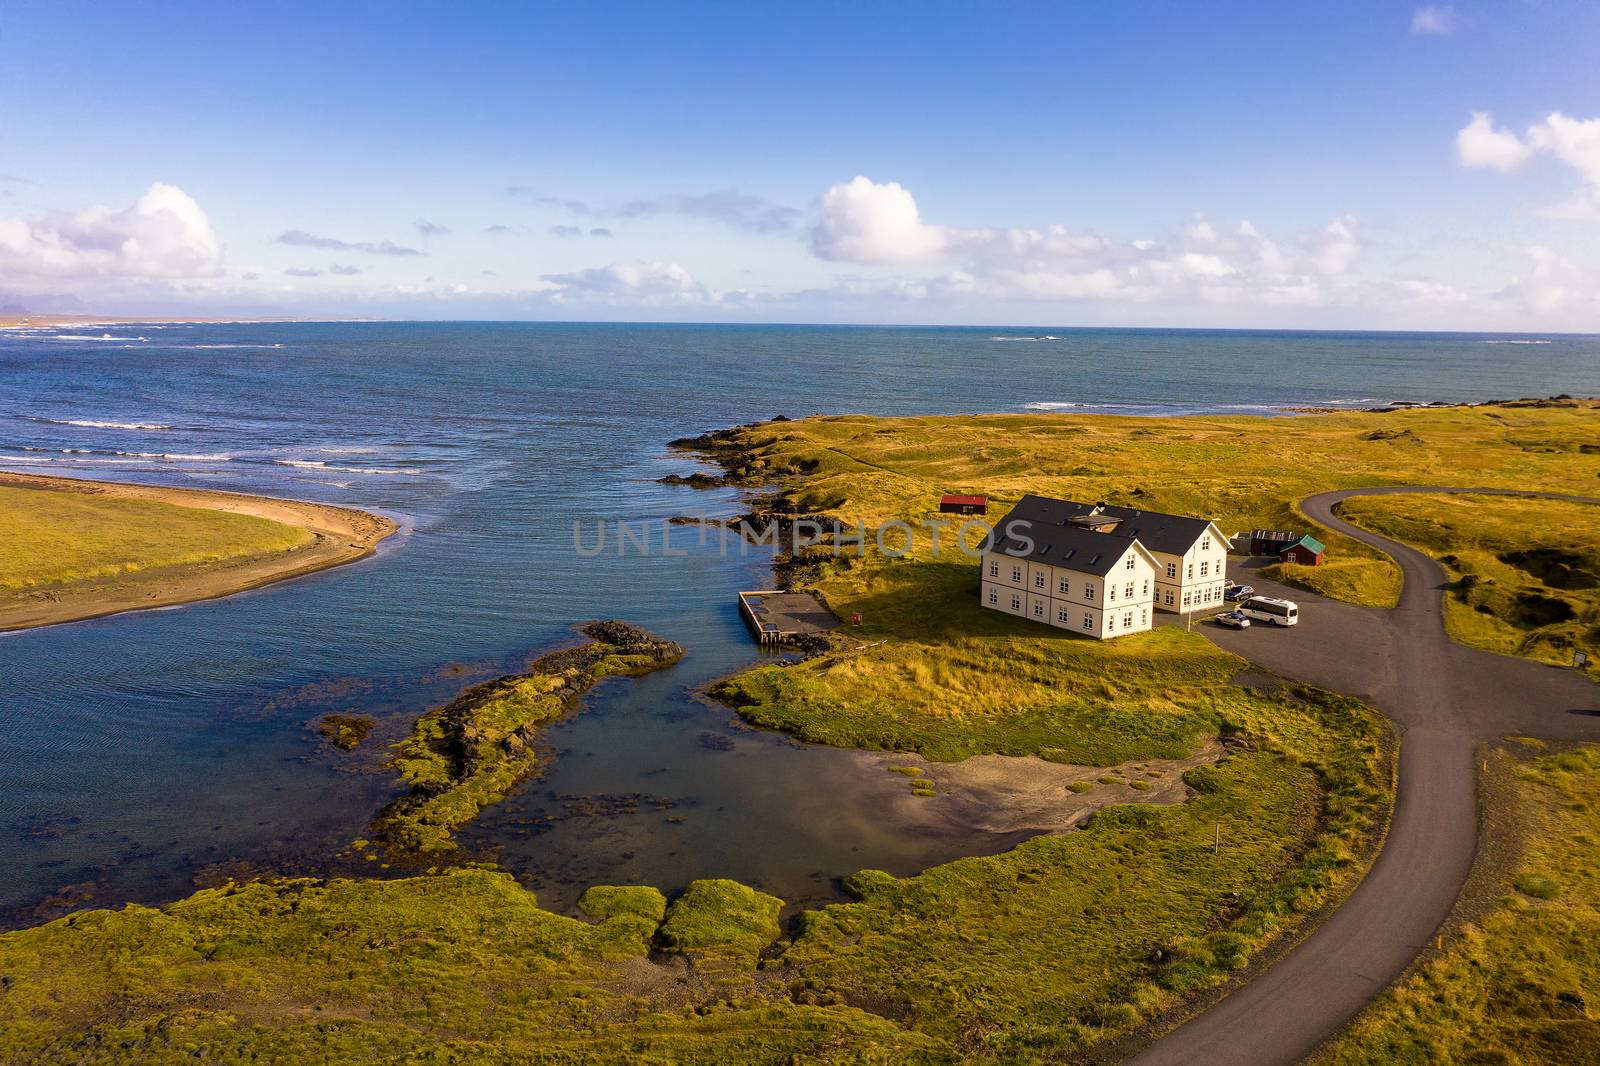 Budir, Iceland - September 8, 2019 : Aerial view of the luxury Hotel Budir at sunset located on the Snaefellsnes peninsula in west Iceland offering views over the Snaefellsjokull volcano and glacier.